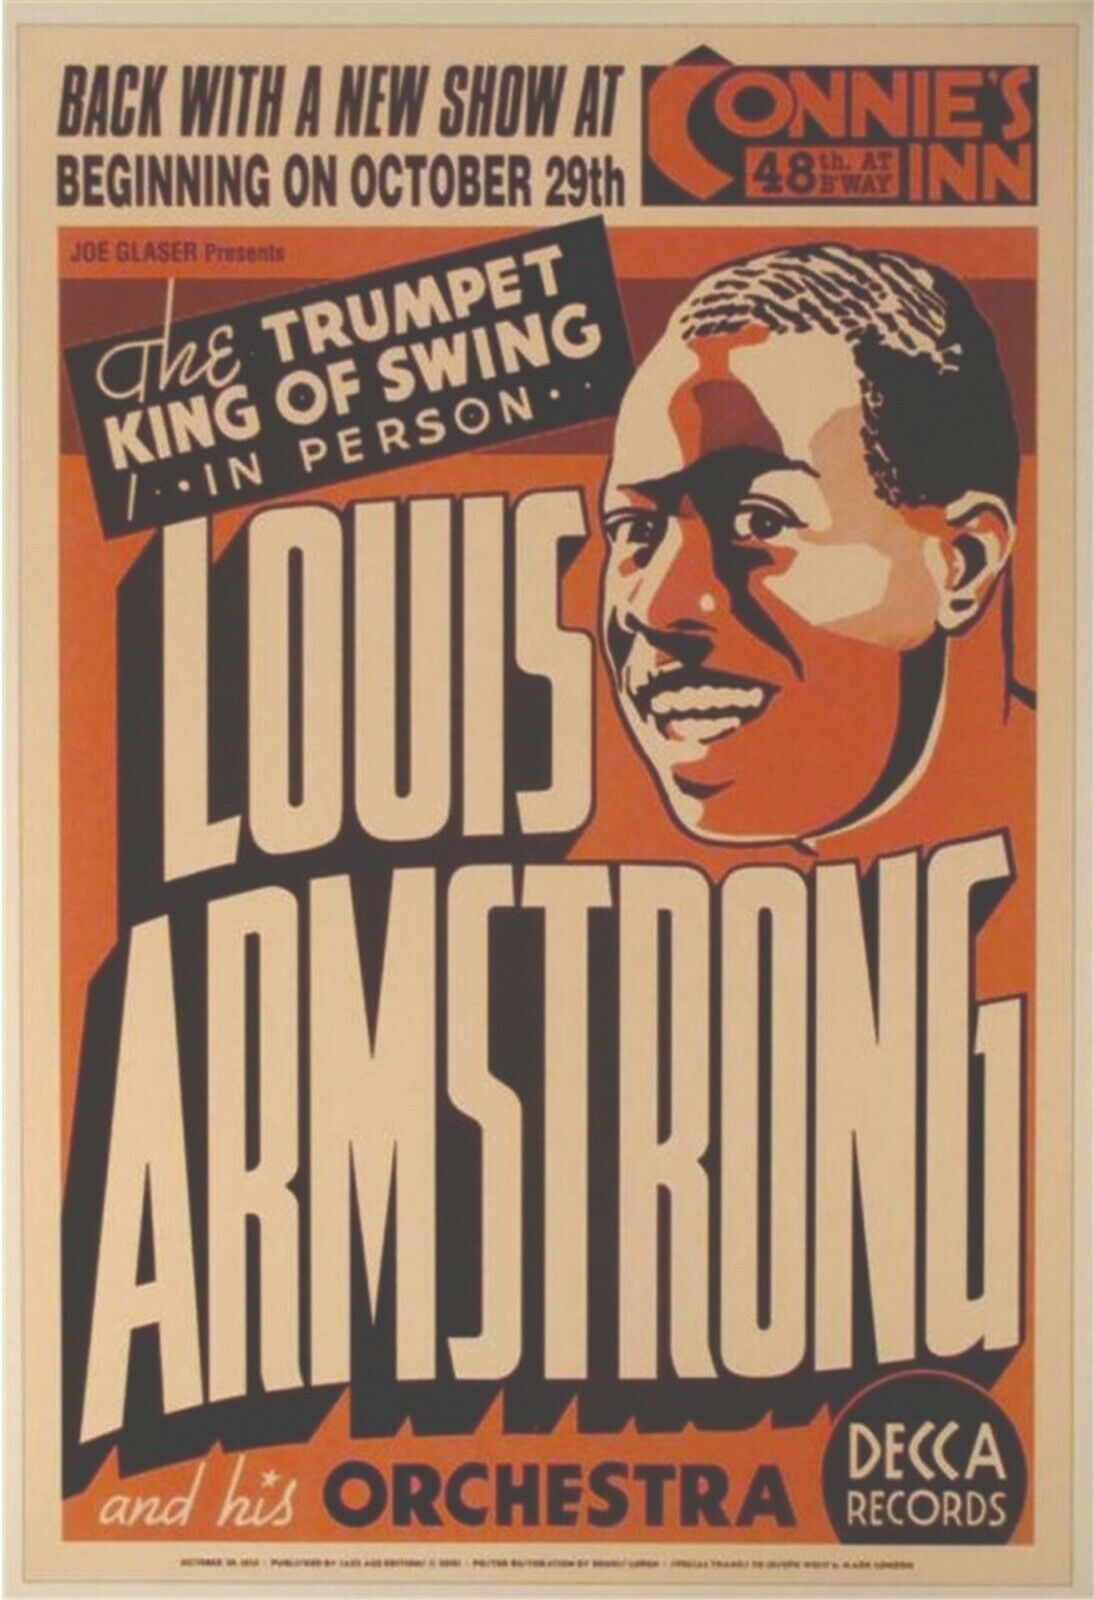 Målestok nominelt Sovereign Louis Armstrong 13" X 19" Reproduction Concert Poster archival quality -  Gold Record Outlet Album and Disc Collectible Memorabilia